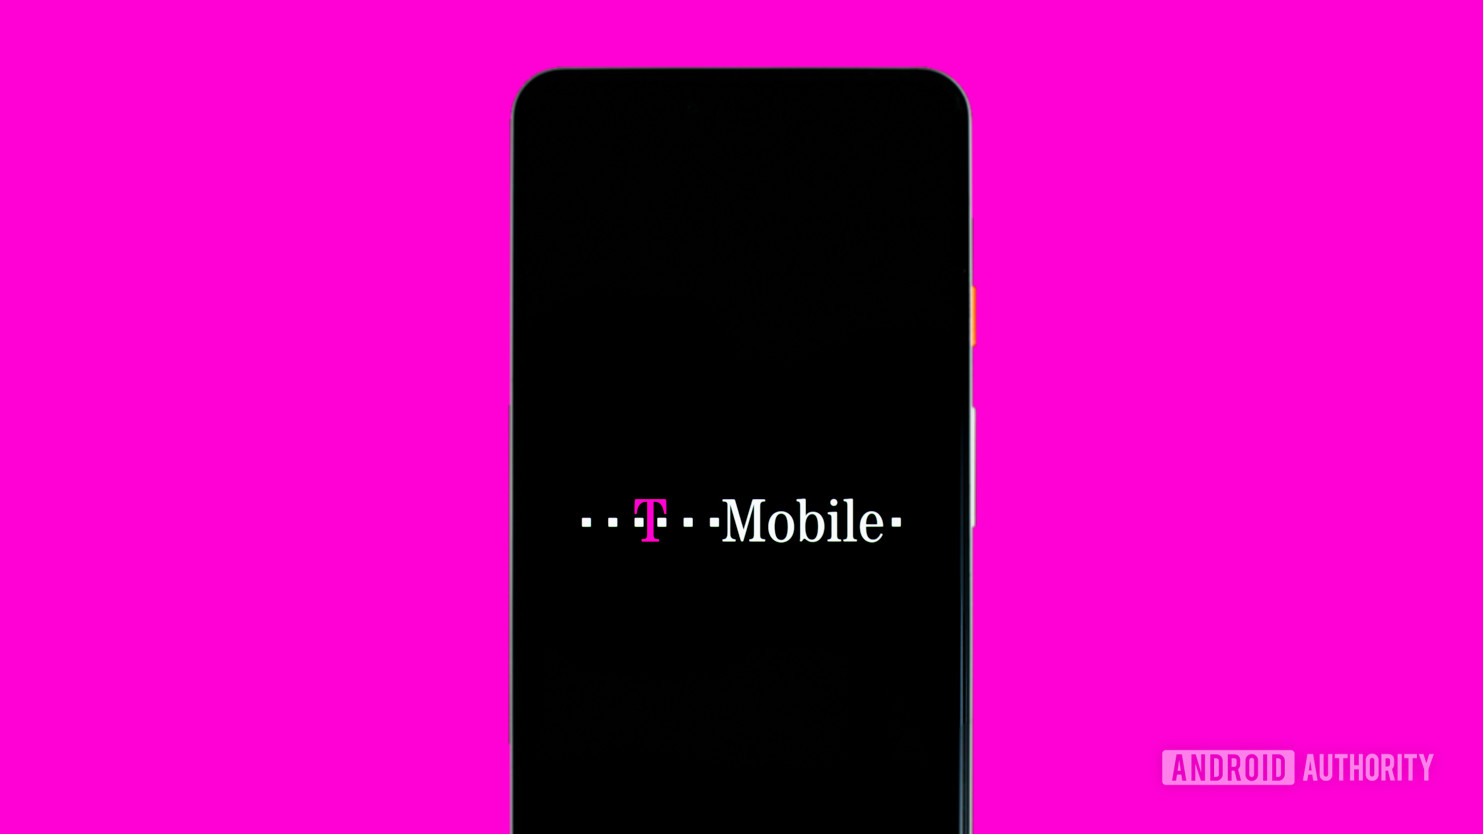 T Mobile logo on the phone stock photo